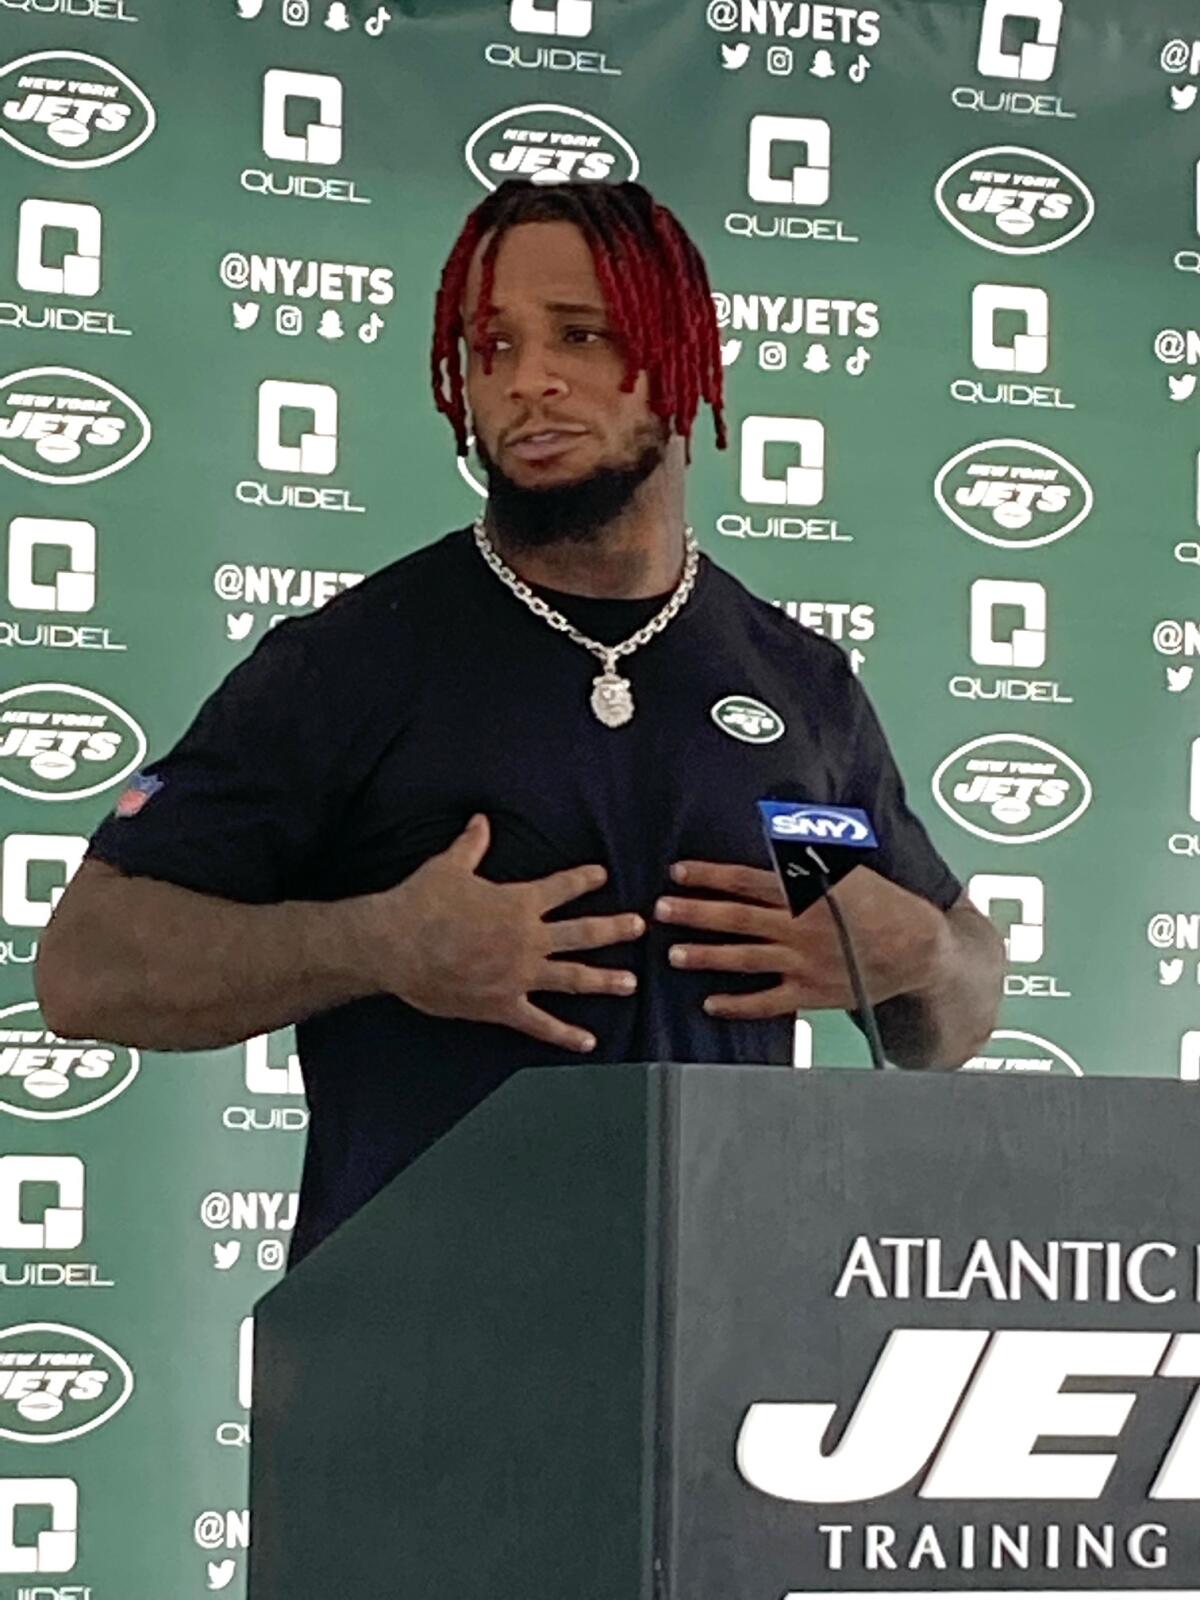 New York Jets linebacker Kwon Alexander speaks to reporters at the team's NFL football training facility in Florham Park, N.J., on Monday, Aug. 1, 2022. (AP Photo/Dennis Waszak Jr.)